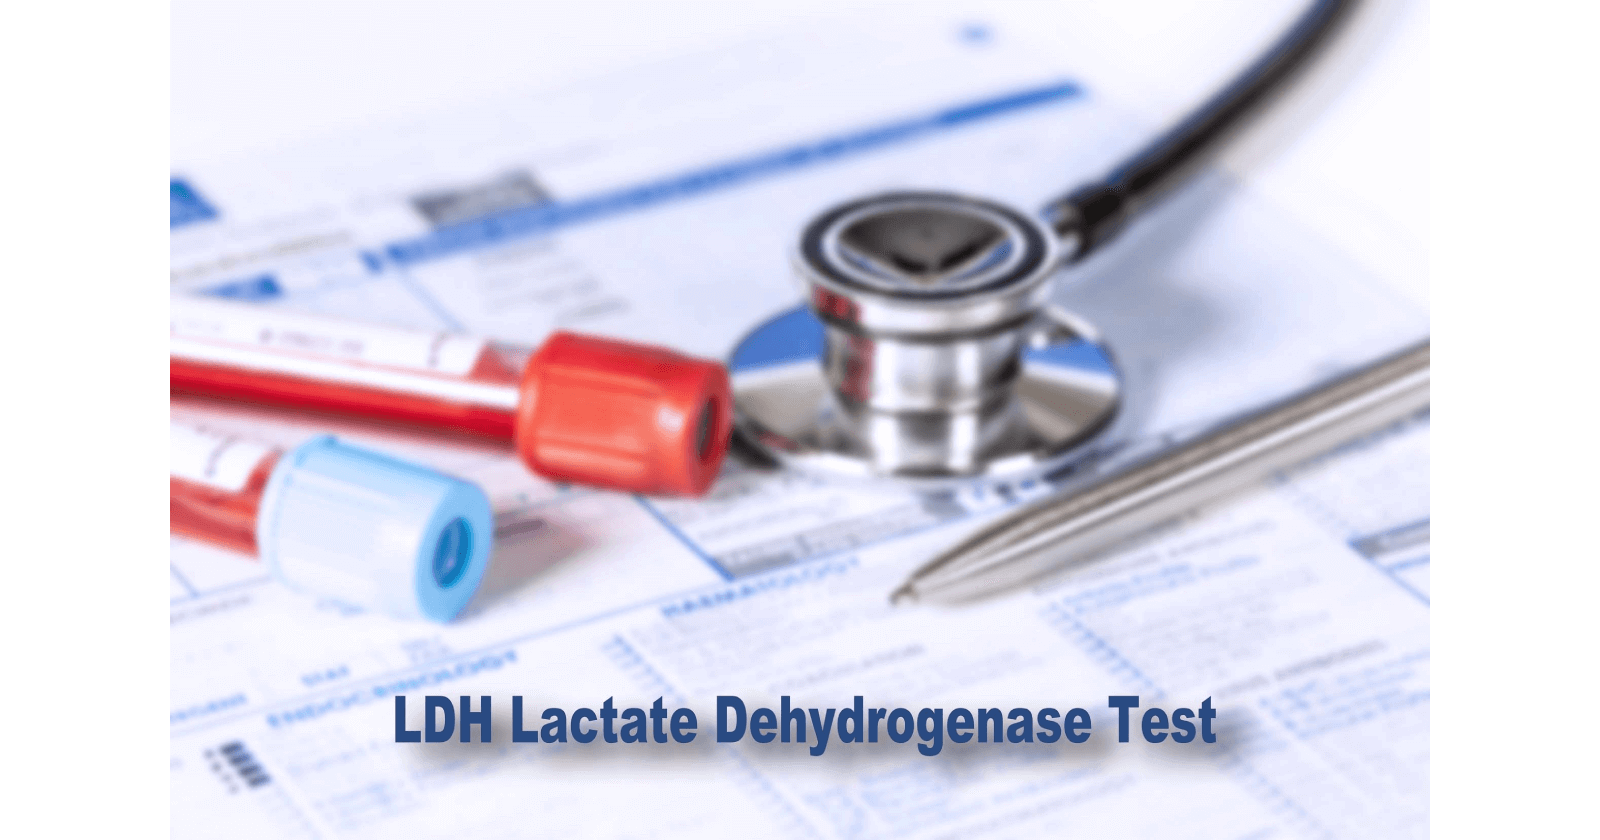 Understanding the Lactate Dehydrogenase (LDH) test: Purpose and risks